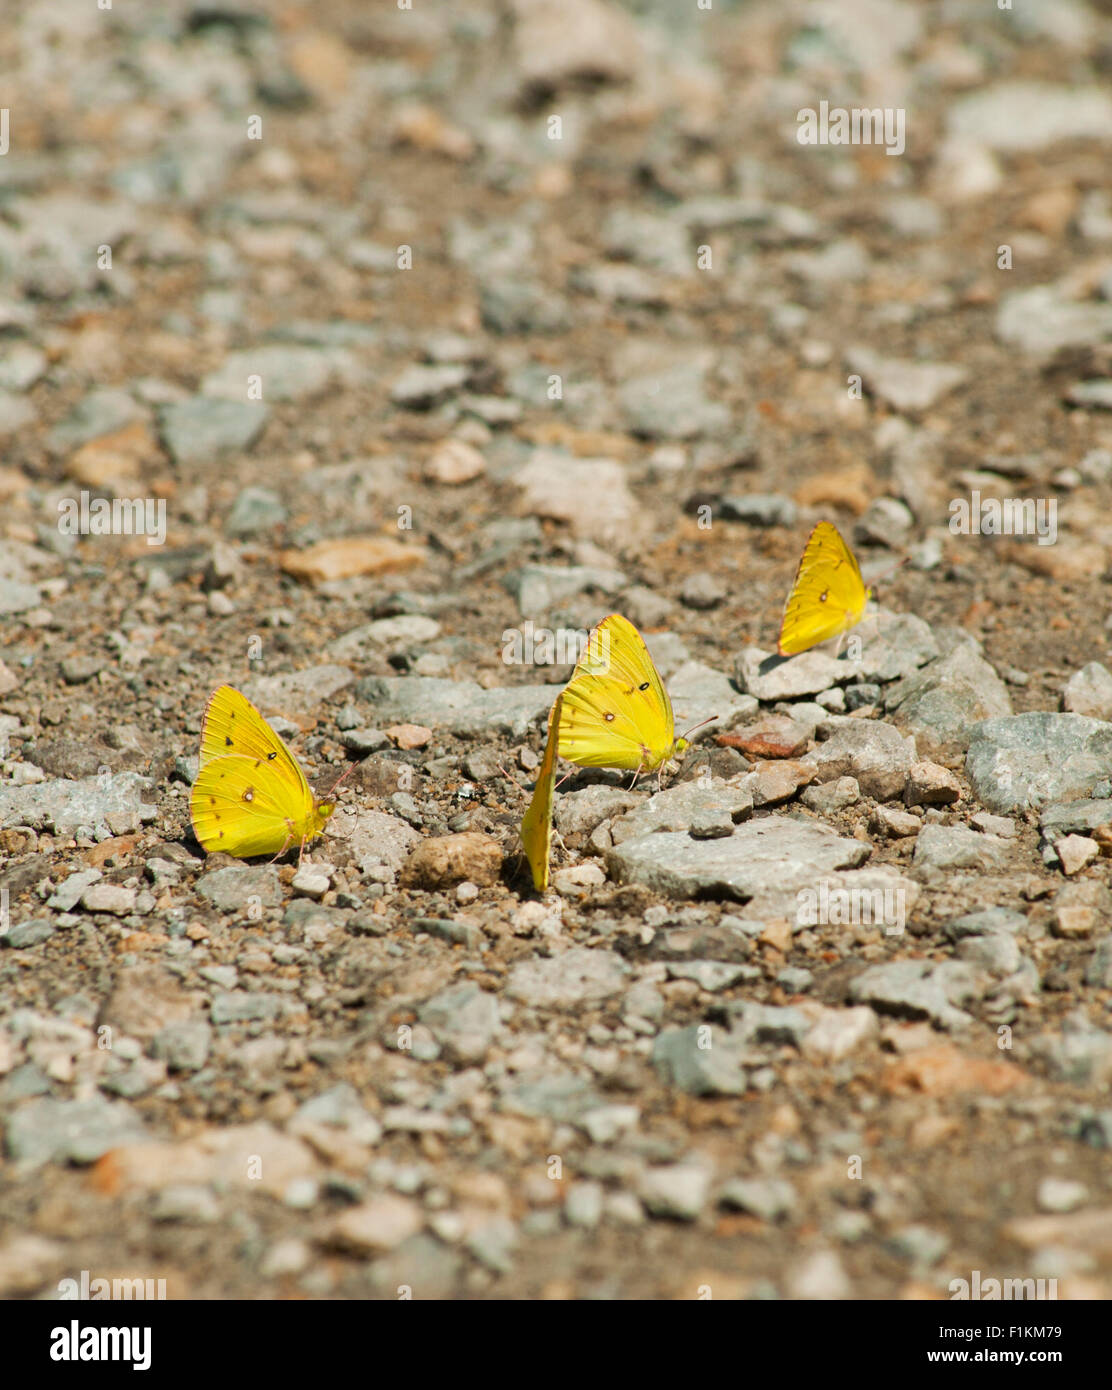 Mud-puddling (puddling) 'Little Yellow Sulphur' butterflies searching for water on damp road during a drought in Indiana. Stock Photo